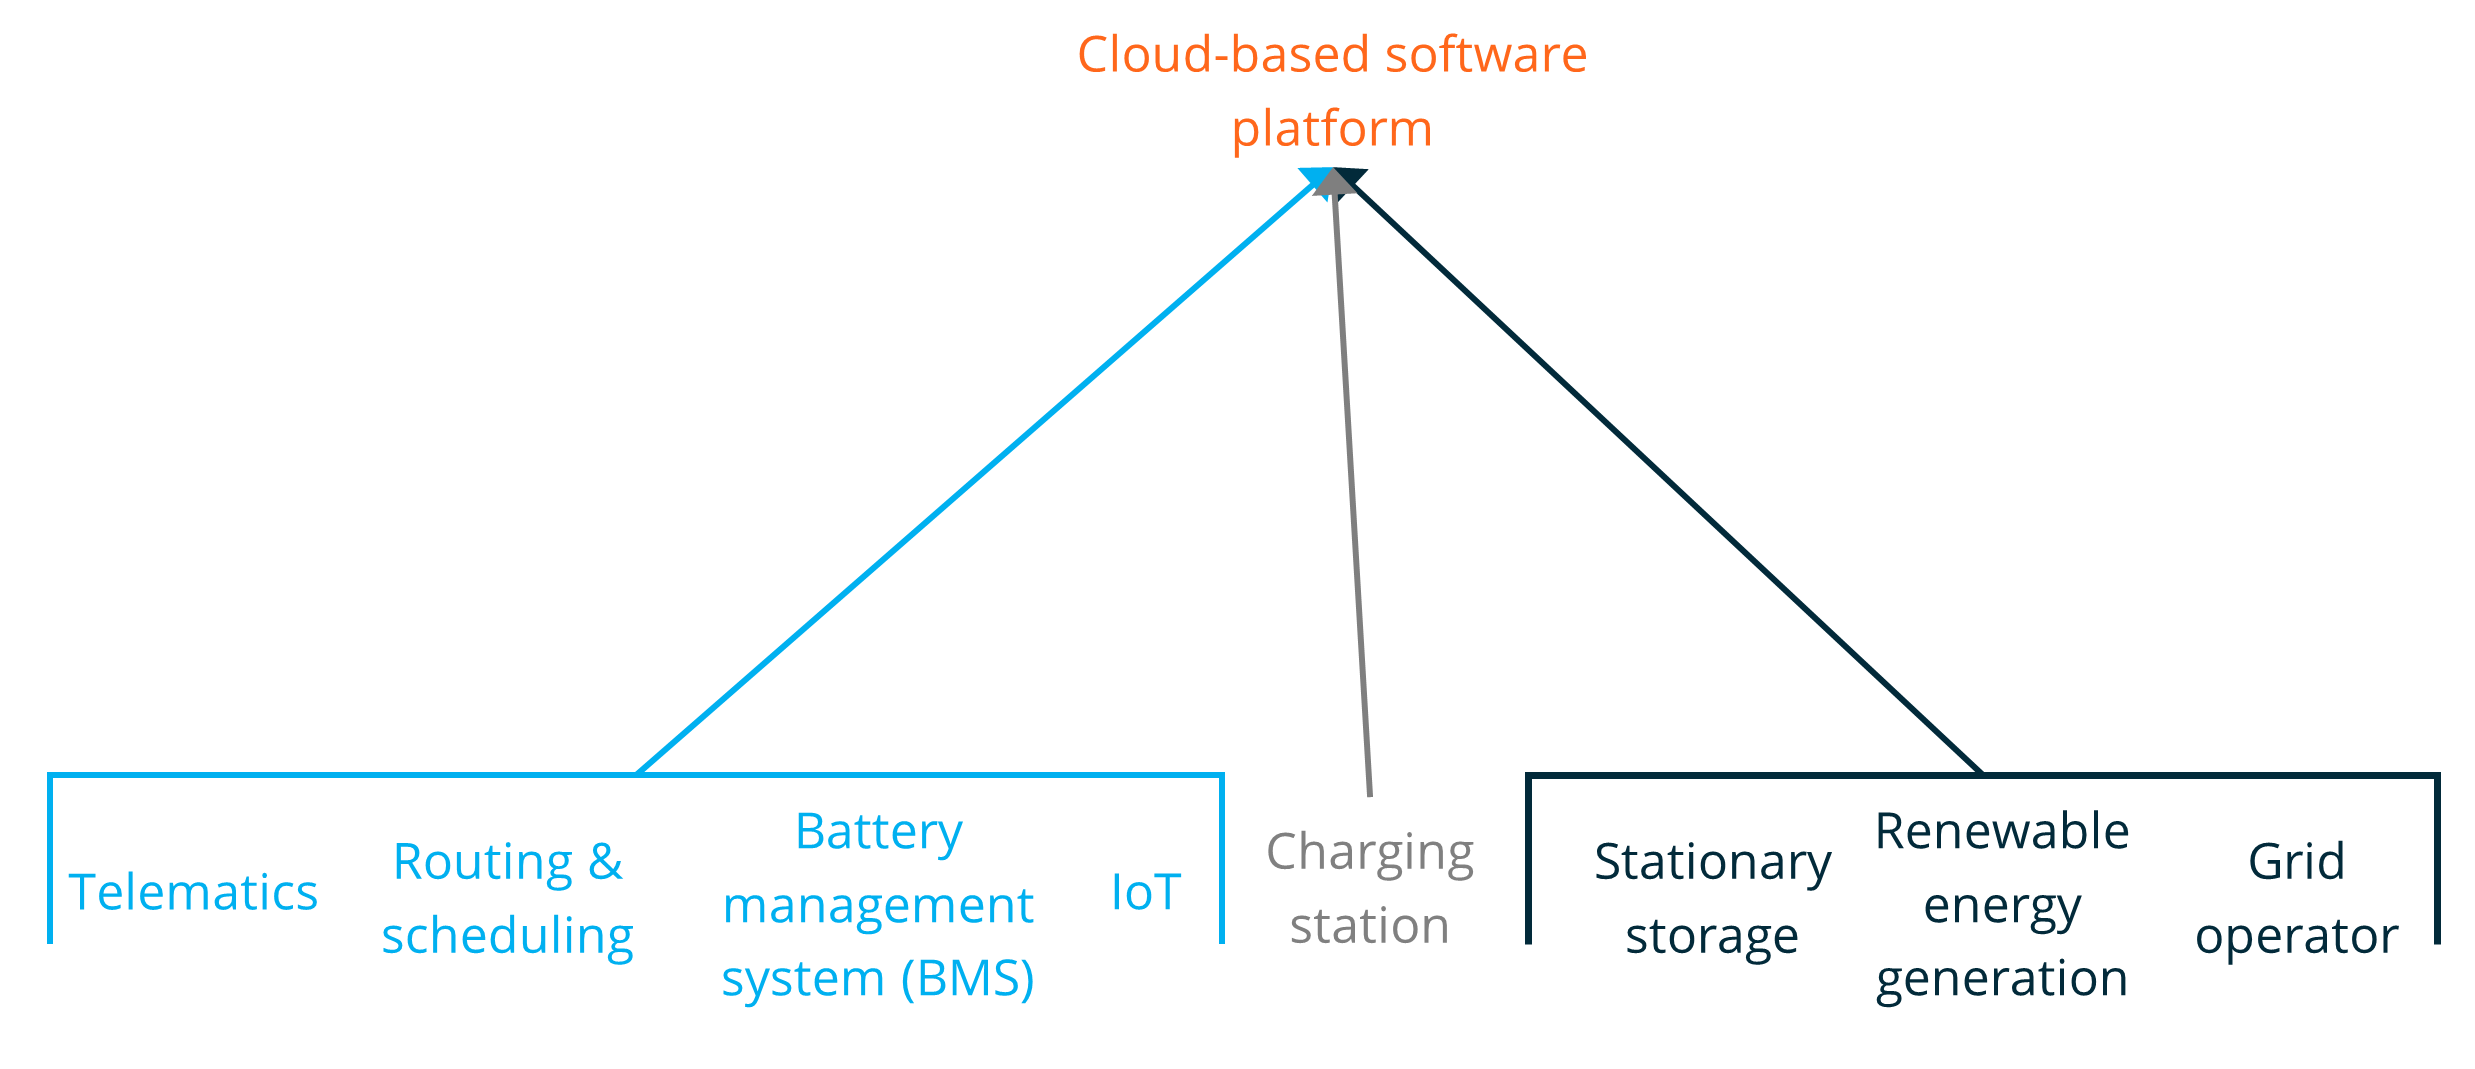 Cloud-based storage platforms and the data generated by electric vehicles and cars